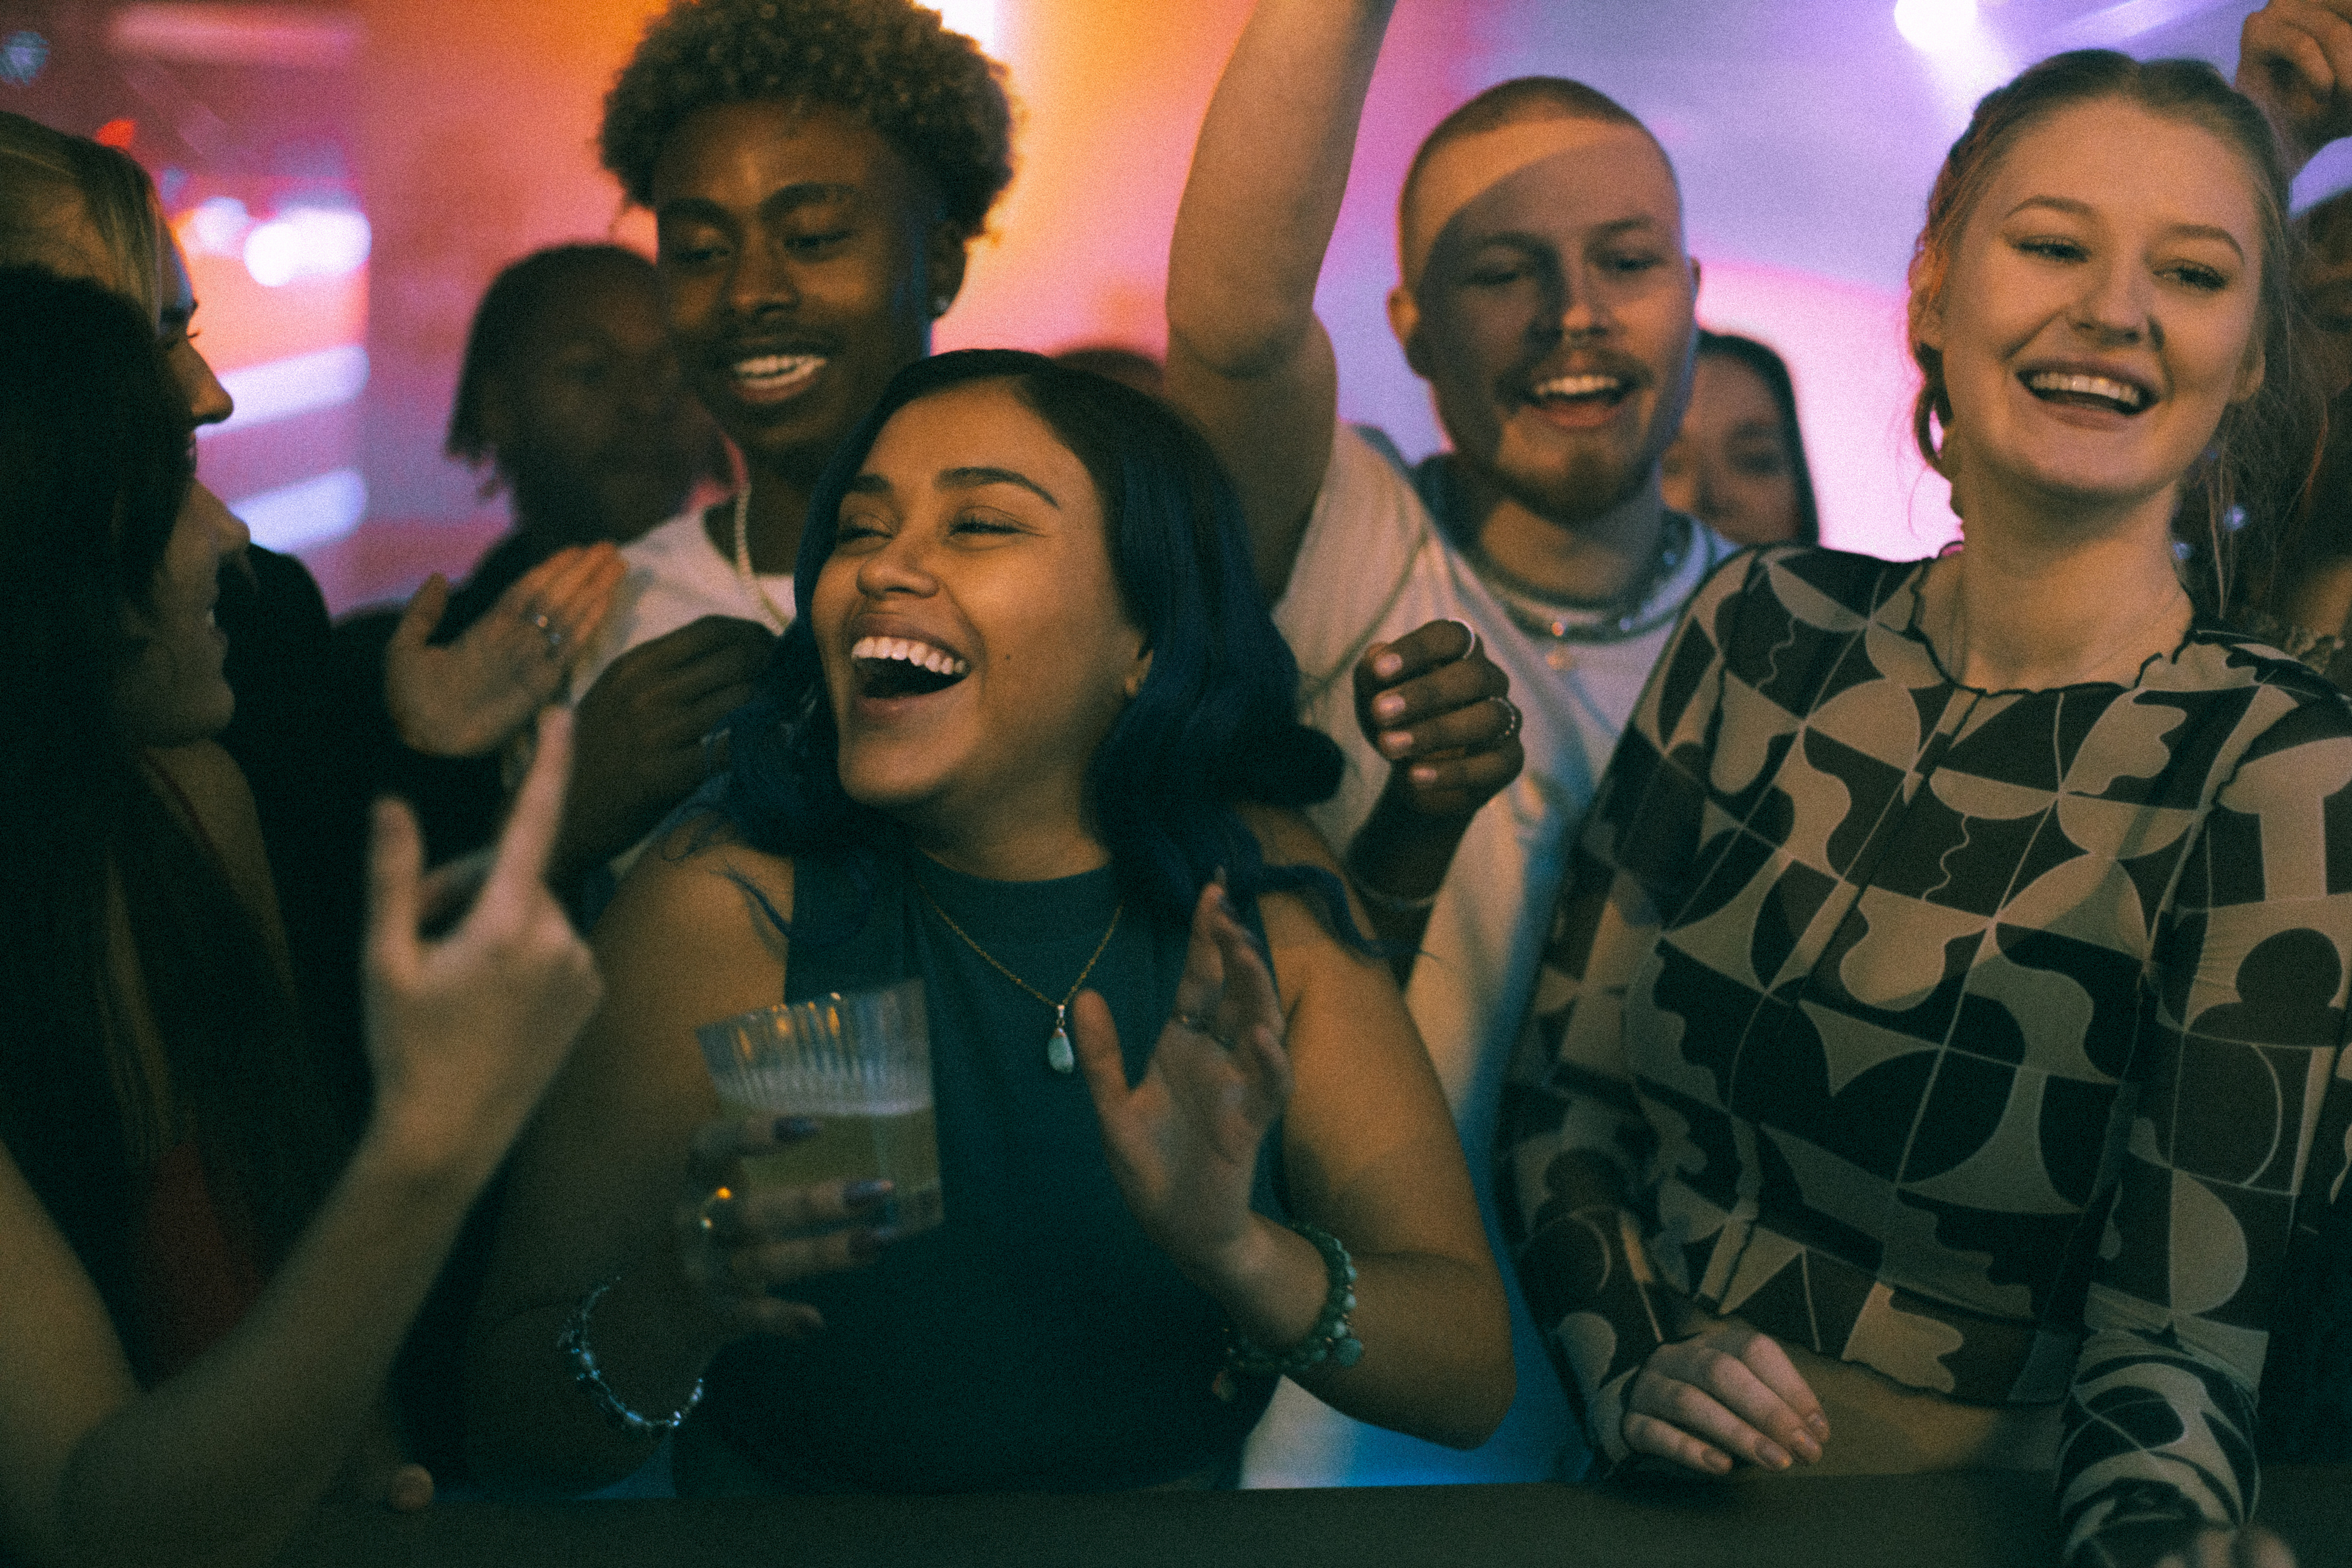 A joyful group of young adults, including a smiling woman in a patterned top, celebrate together in a lively, intimate party setting